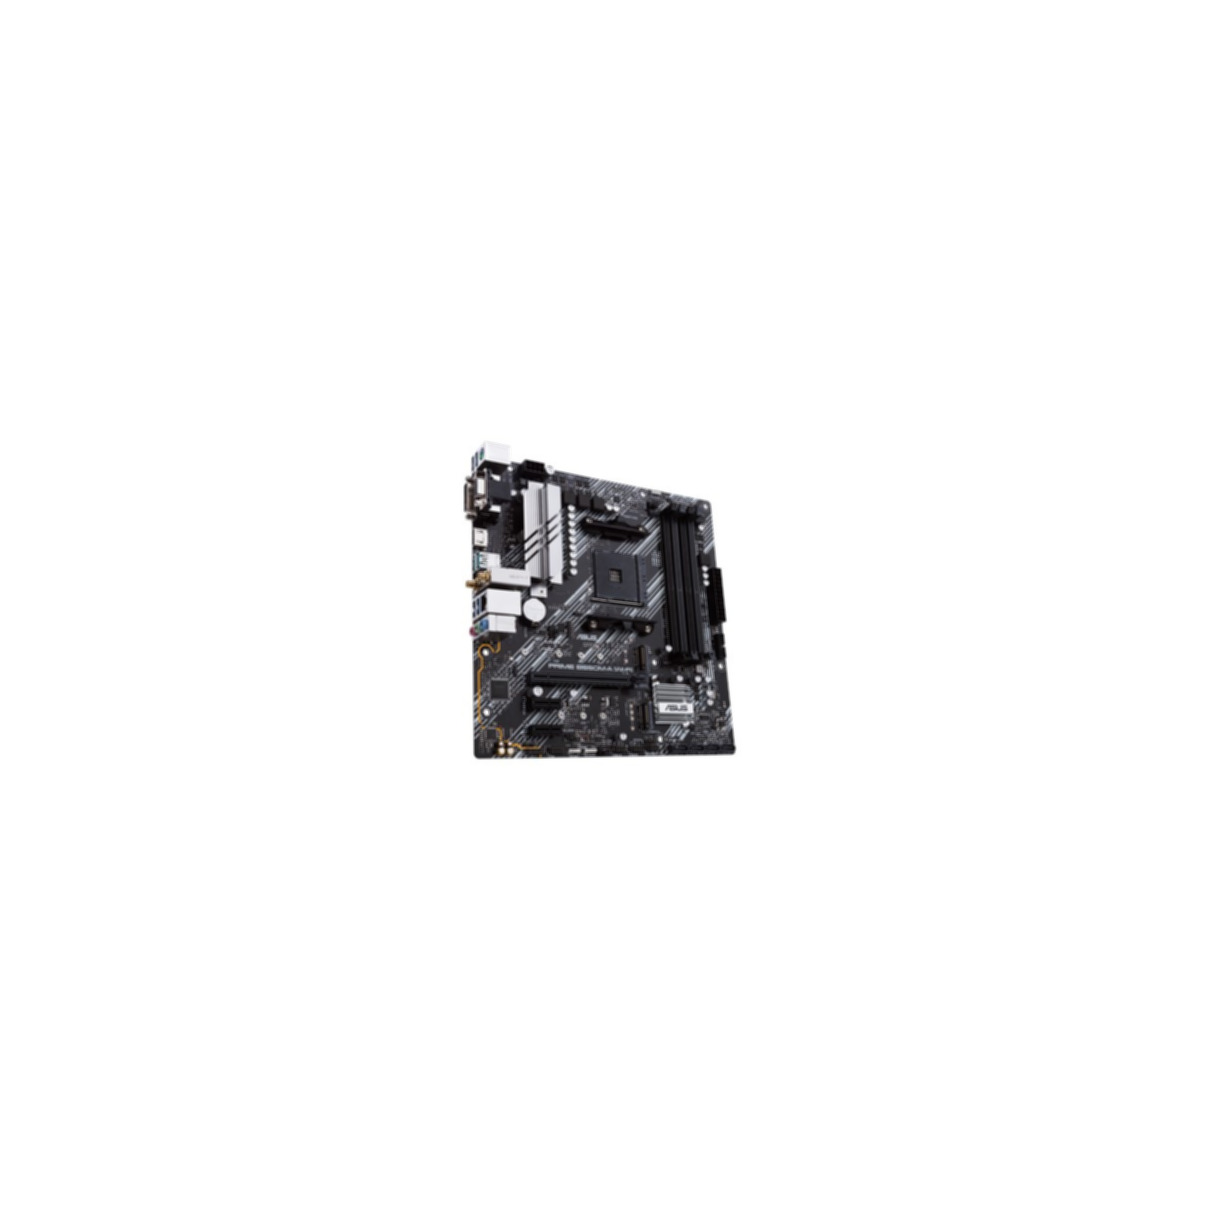 ASUS PRIME B550M-A (WI-FI) Mainboards schwarz;silber